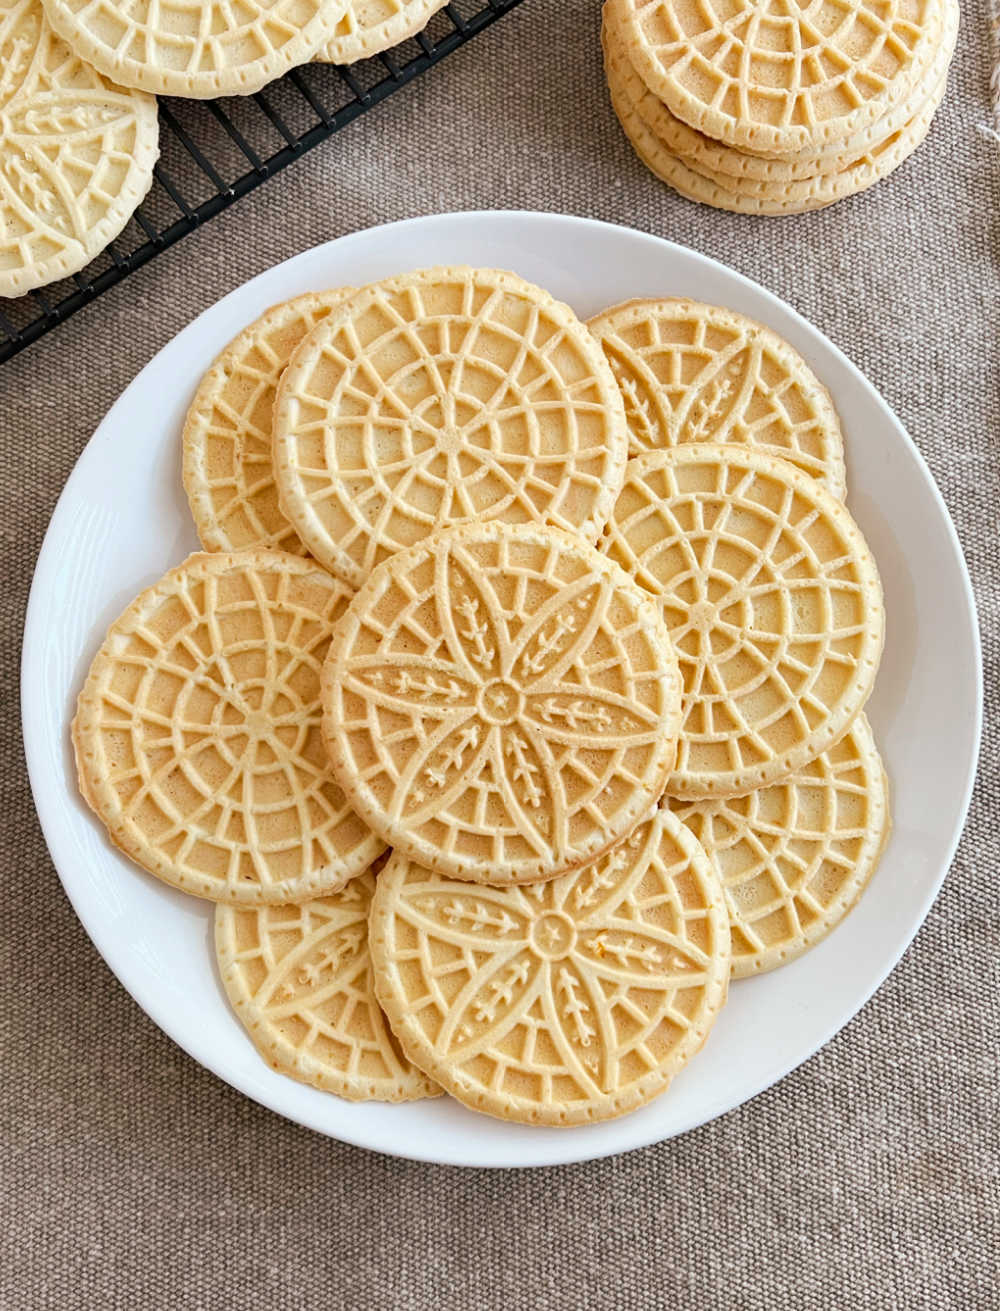 pizzelle cookies on white plate.